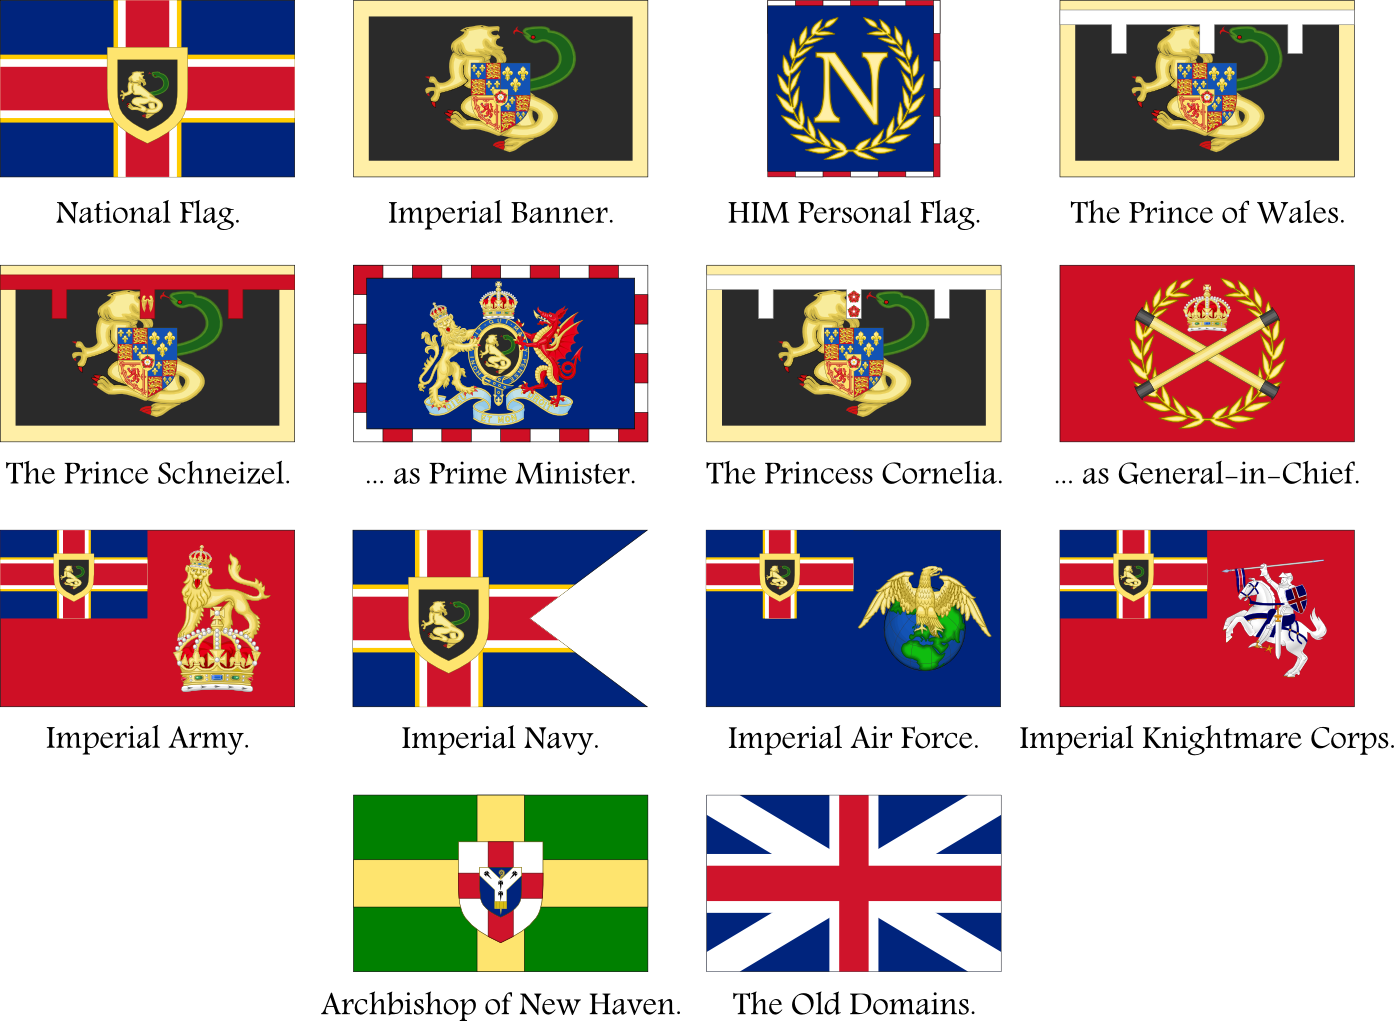 flags_of_britannia_by_firelord_zuko-d4y7j4i.png